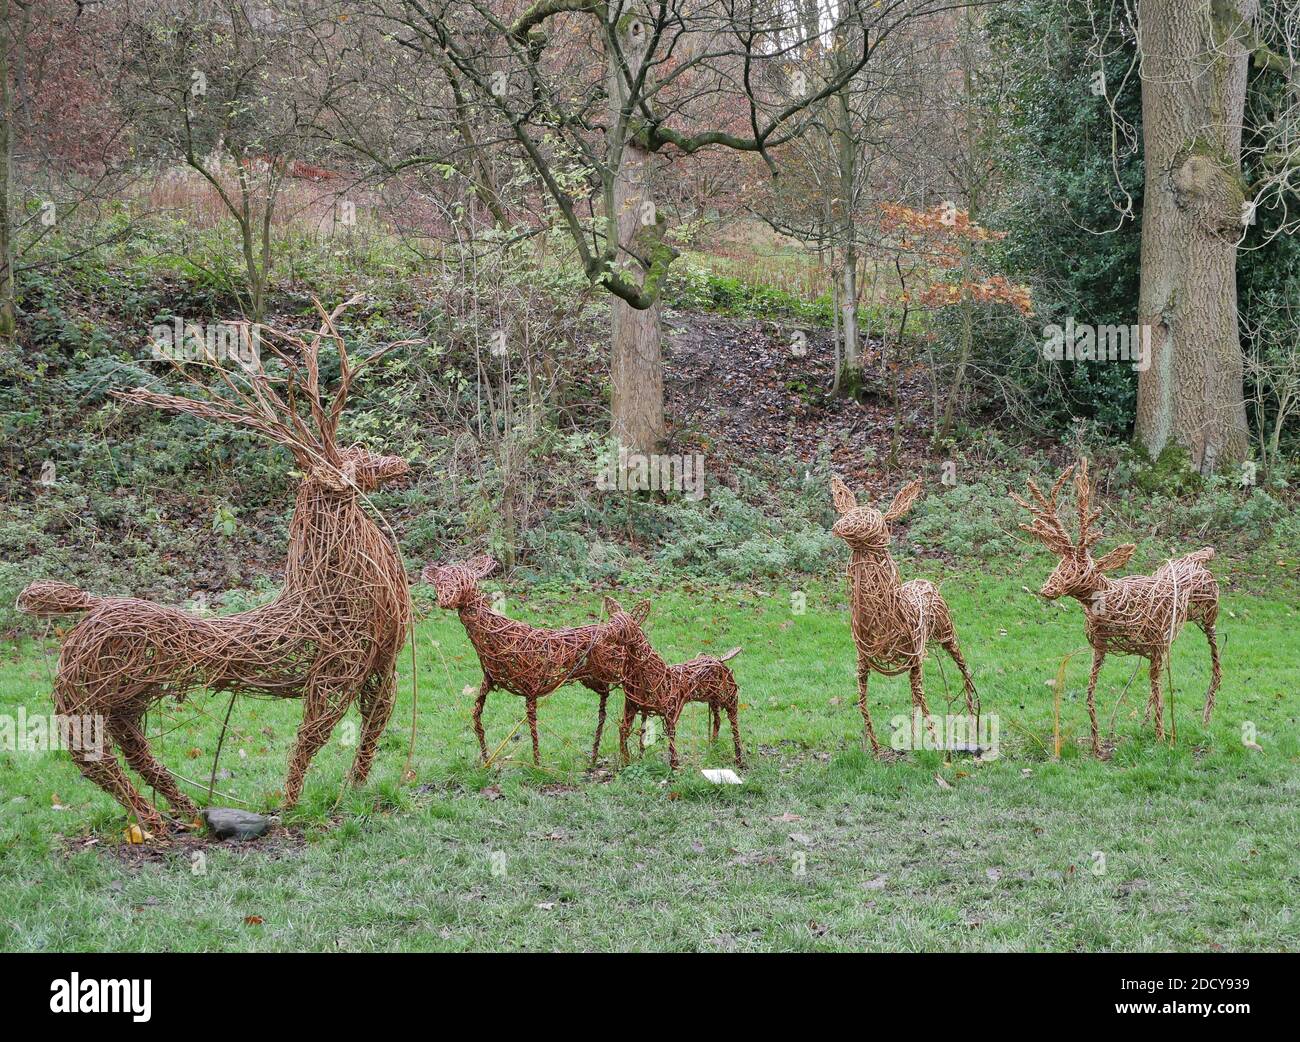 Five large sculpture models of deer in woven willow in green field with trees in the background Stock Photo